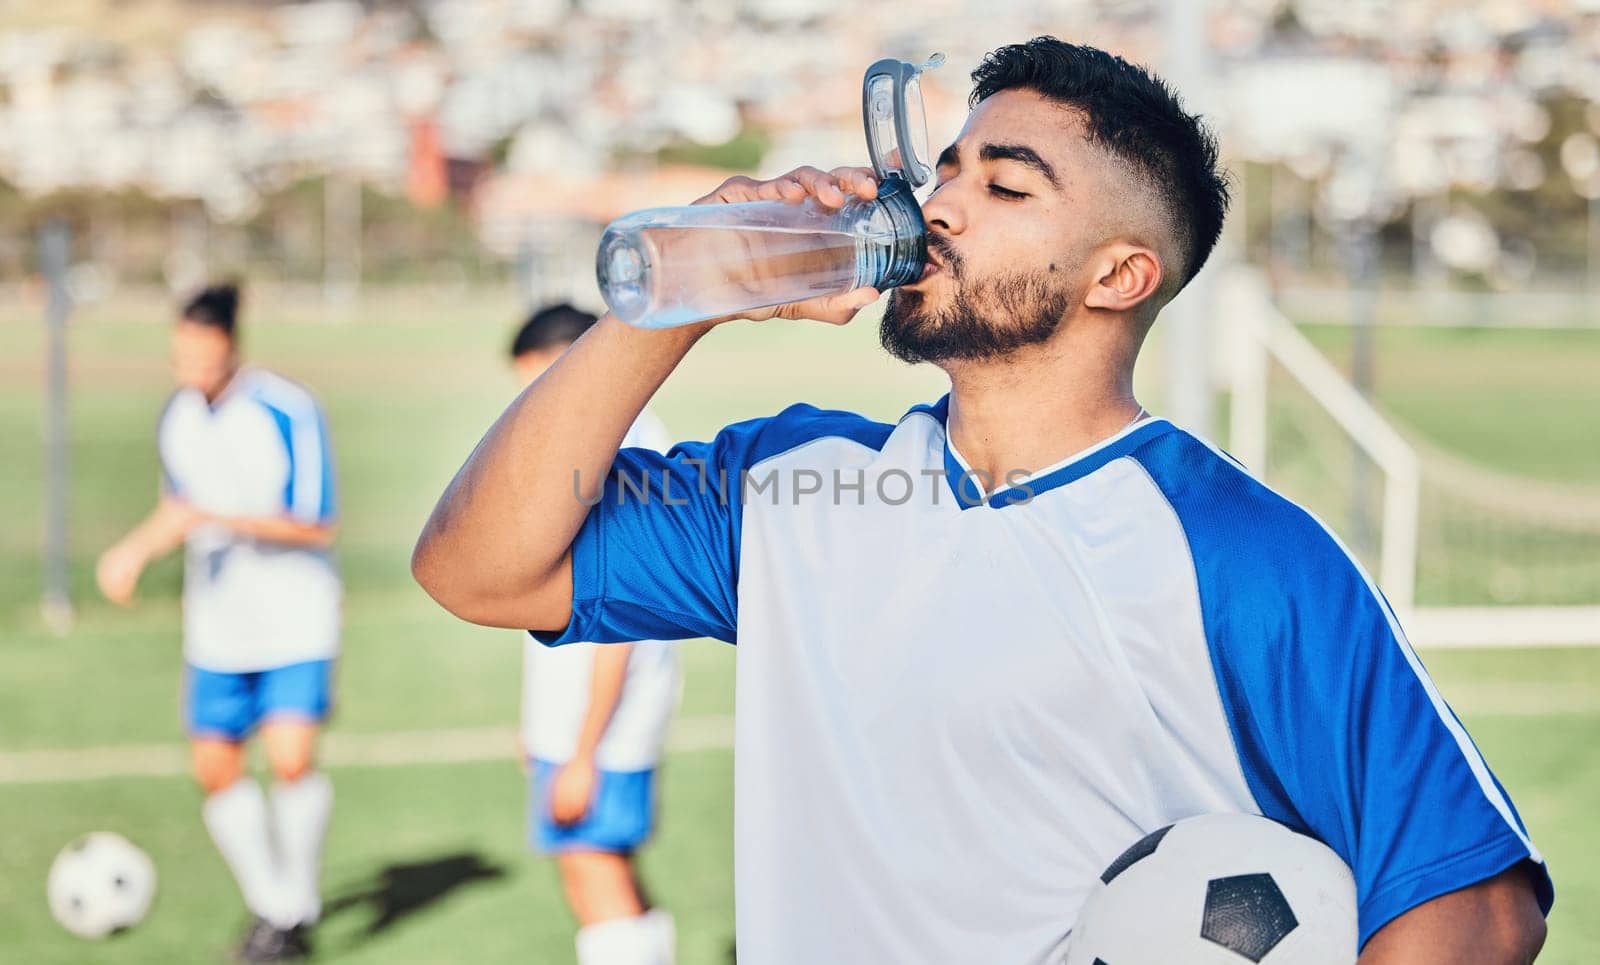 Football, athlete and man drinking water outdoor on a sports field for fitness competition. Tired male soccer player on a break and exhausted from exercise, challenge or training workout for health.